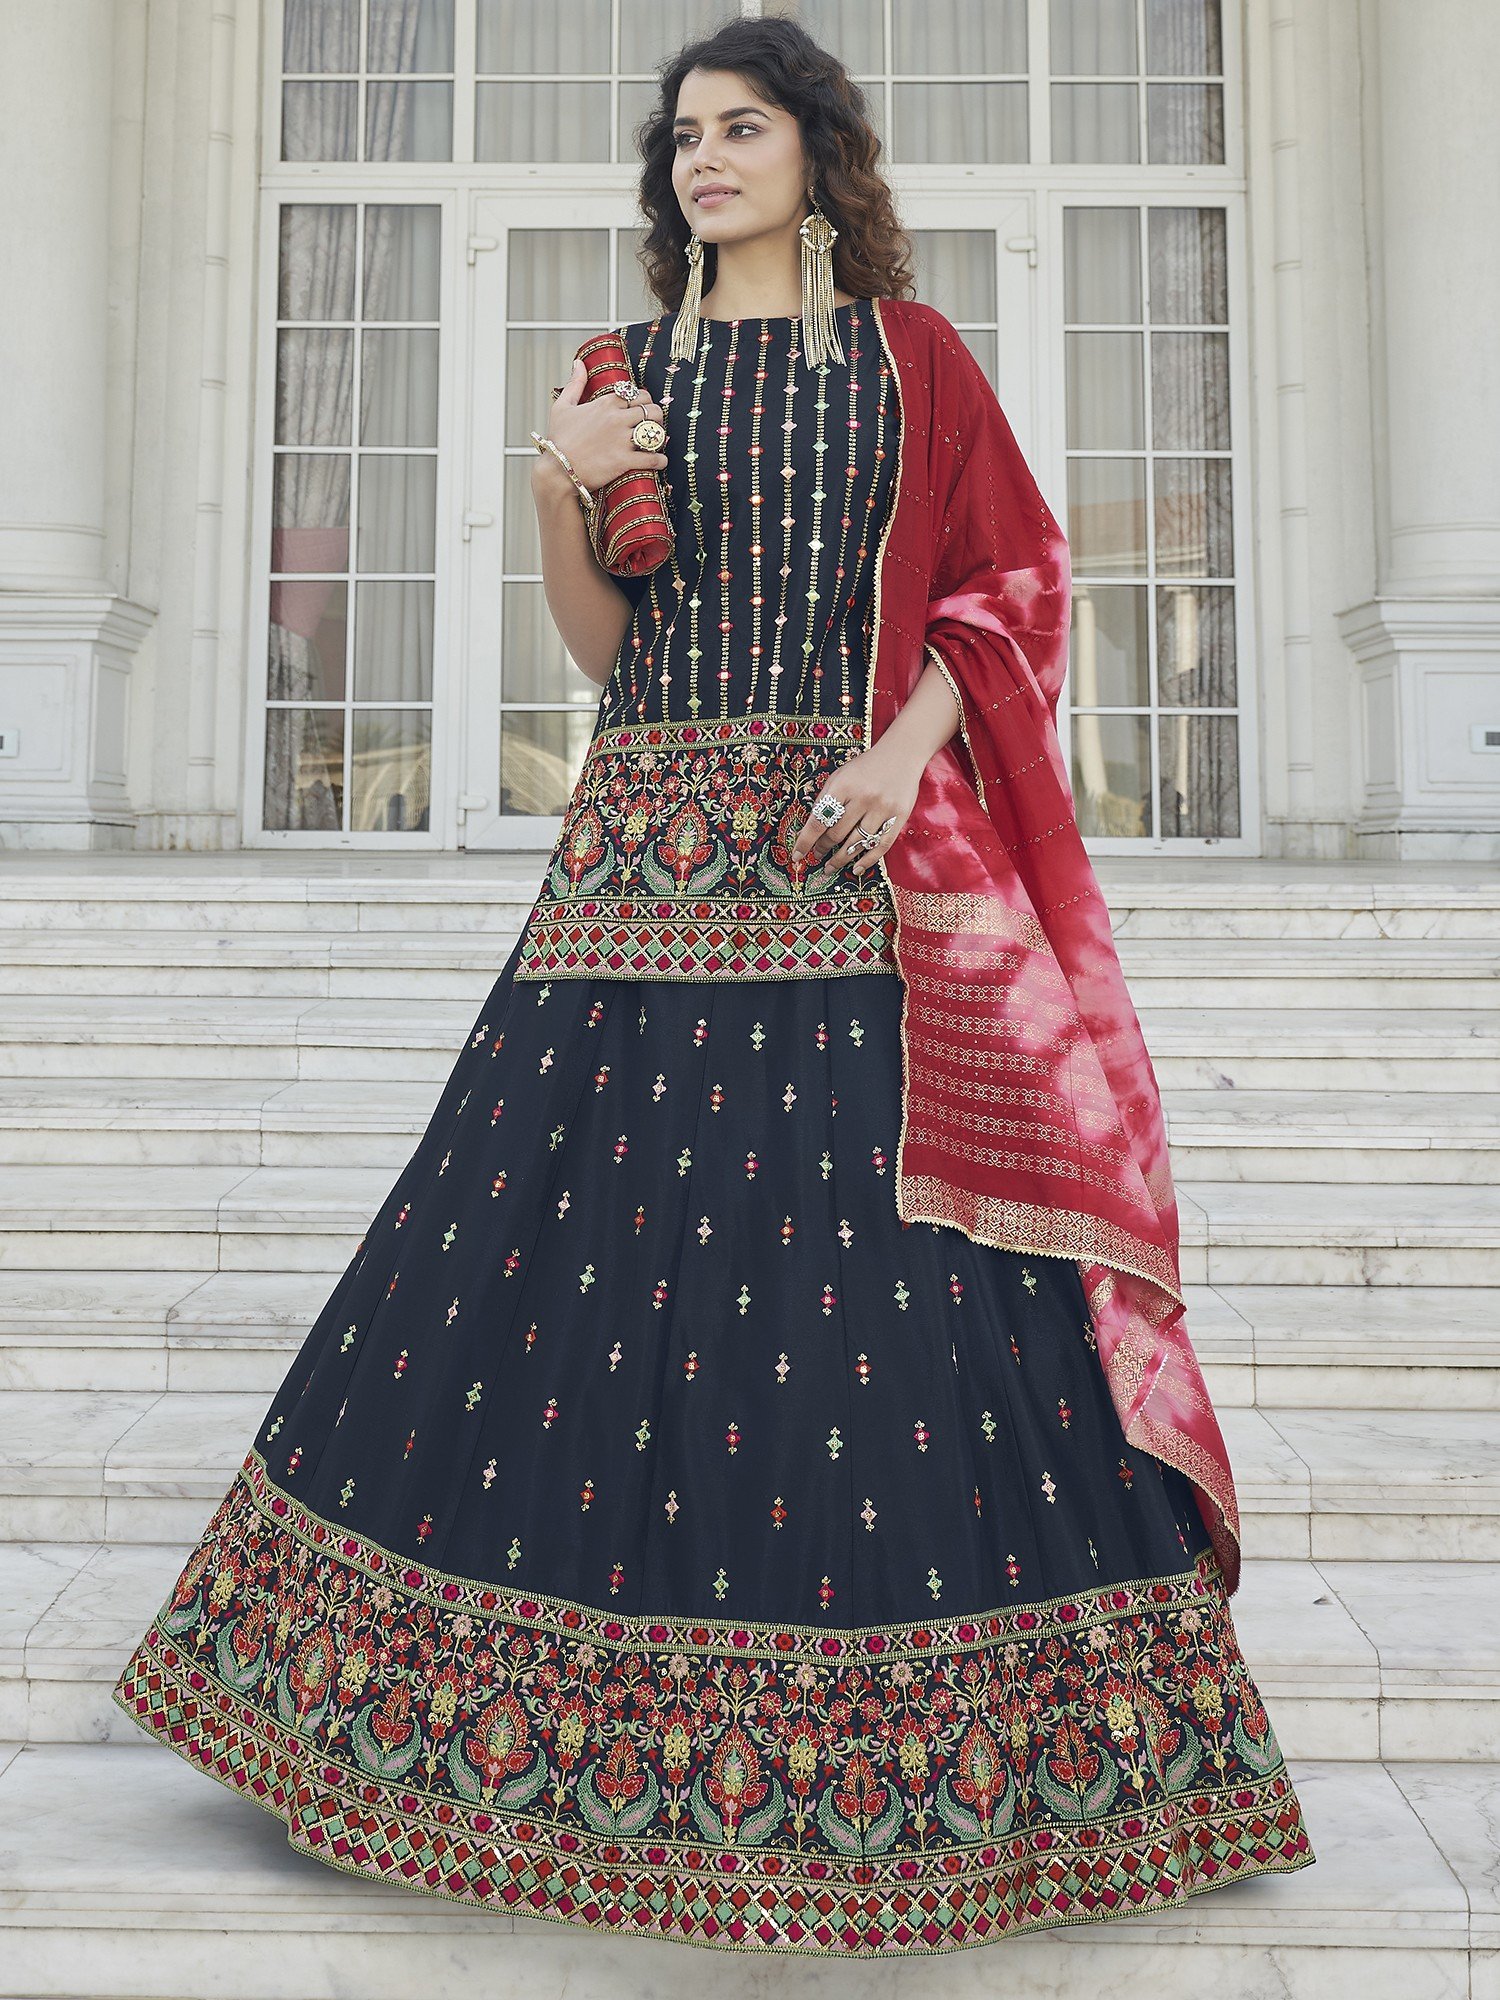 3 Layer Cancan Under Skirt SM-309 - Ajmery Pakistan | Online Clothing Store  | Cash on Delivery